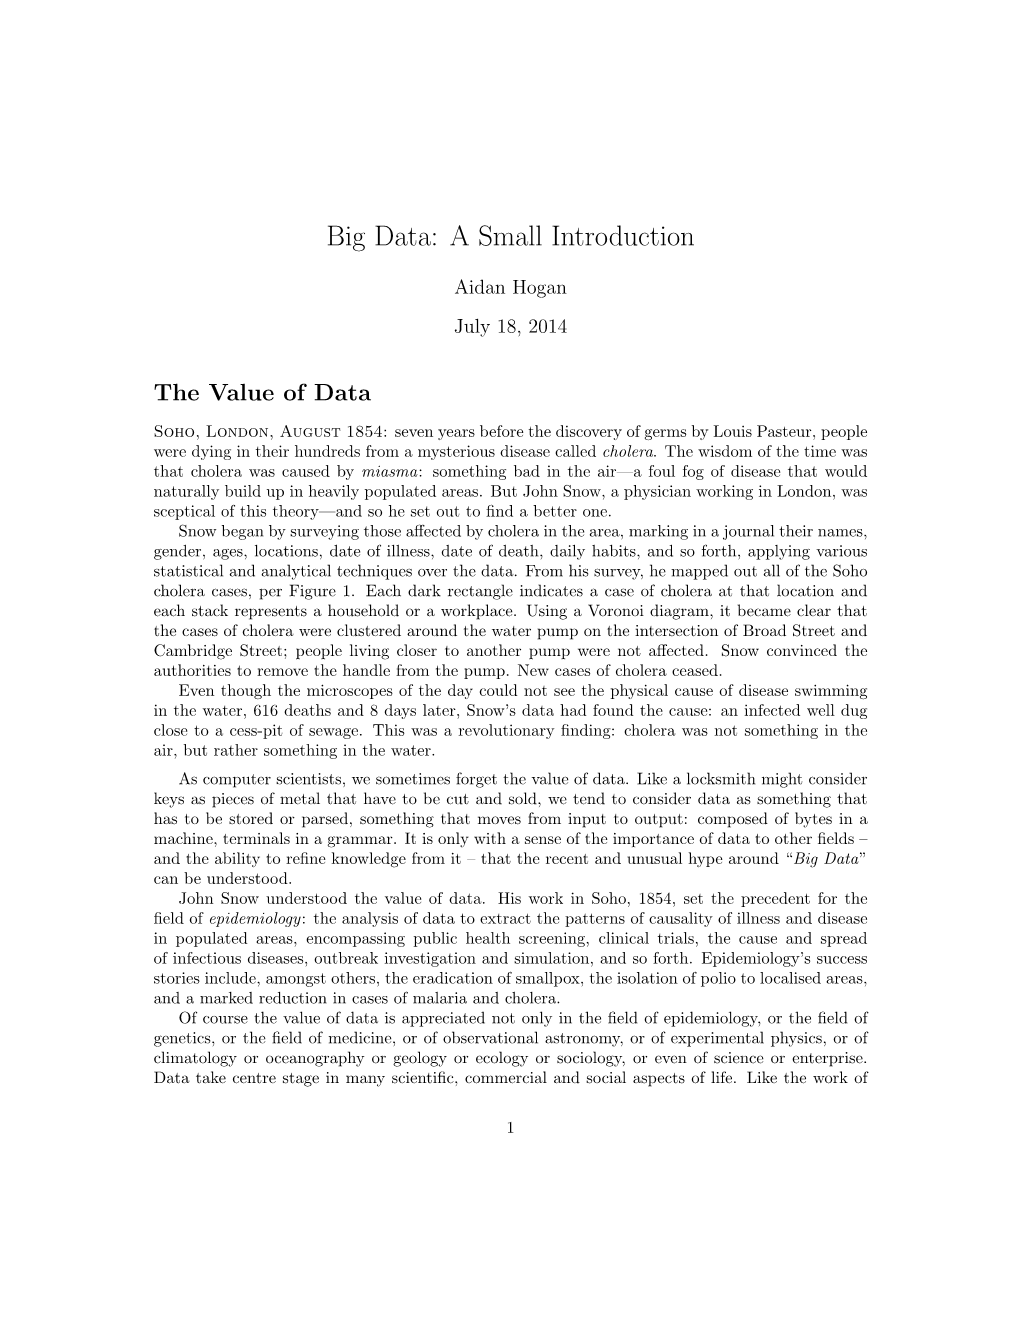 Big Data: a Small Introduction